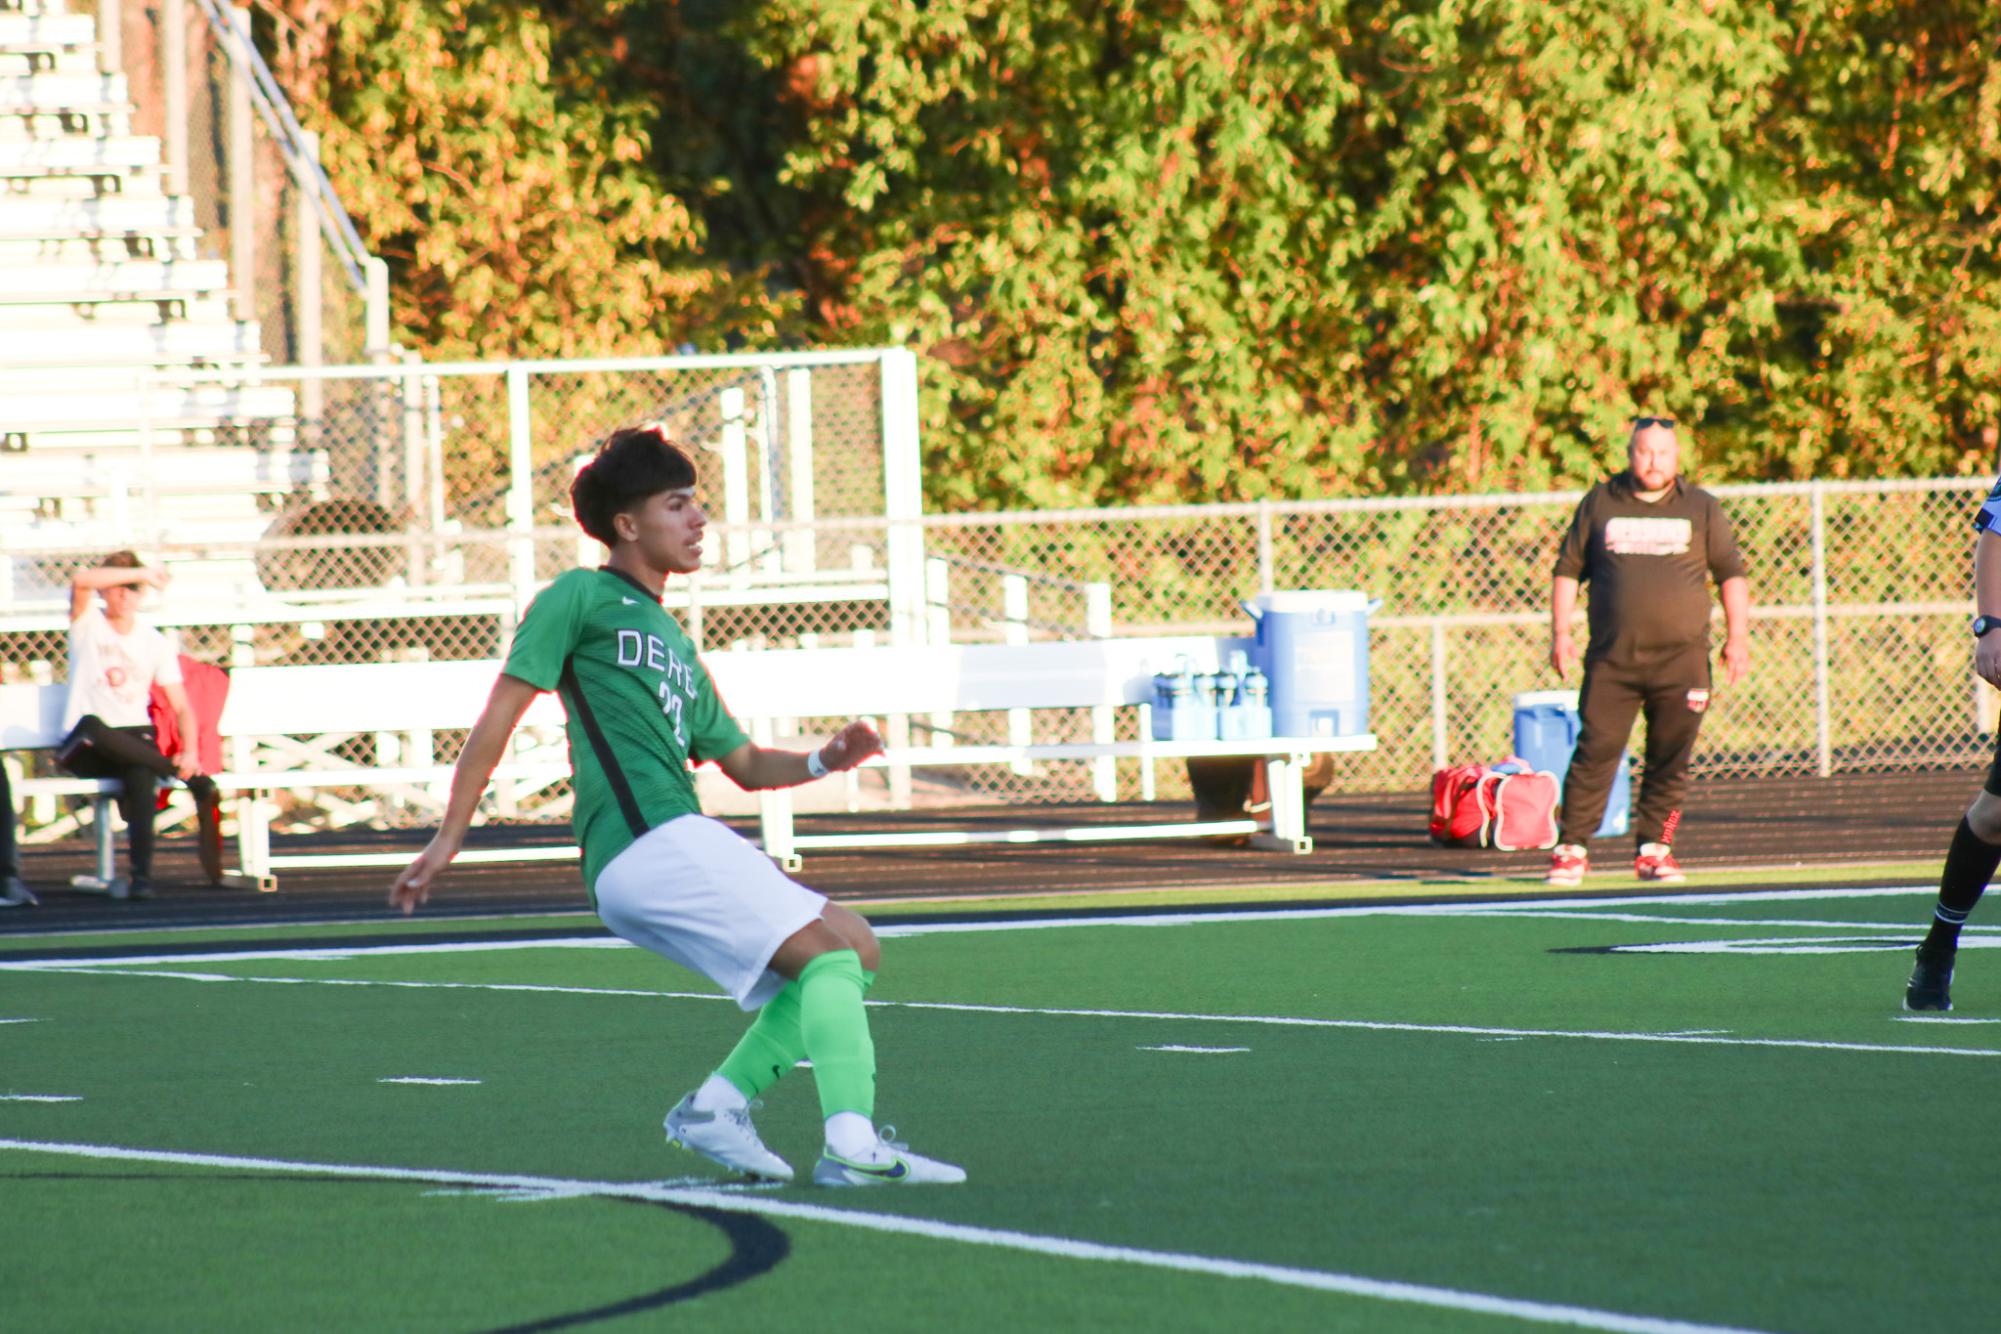 Boys+soccer+regional+finals+vs+Liberal+%28Photos+by+Ava+Mbawuike%29